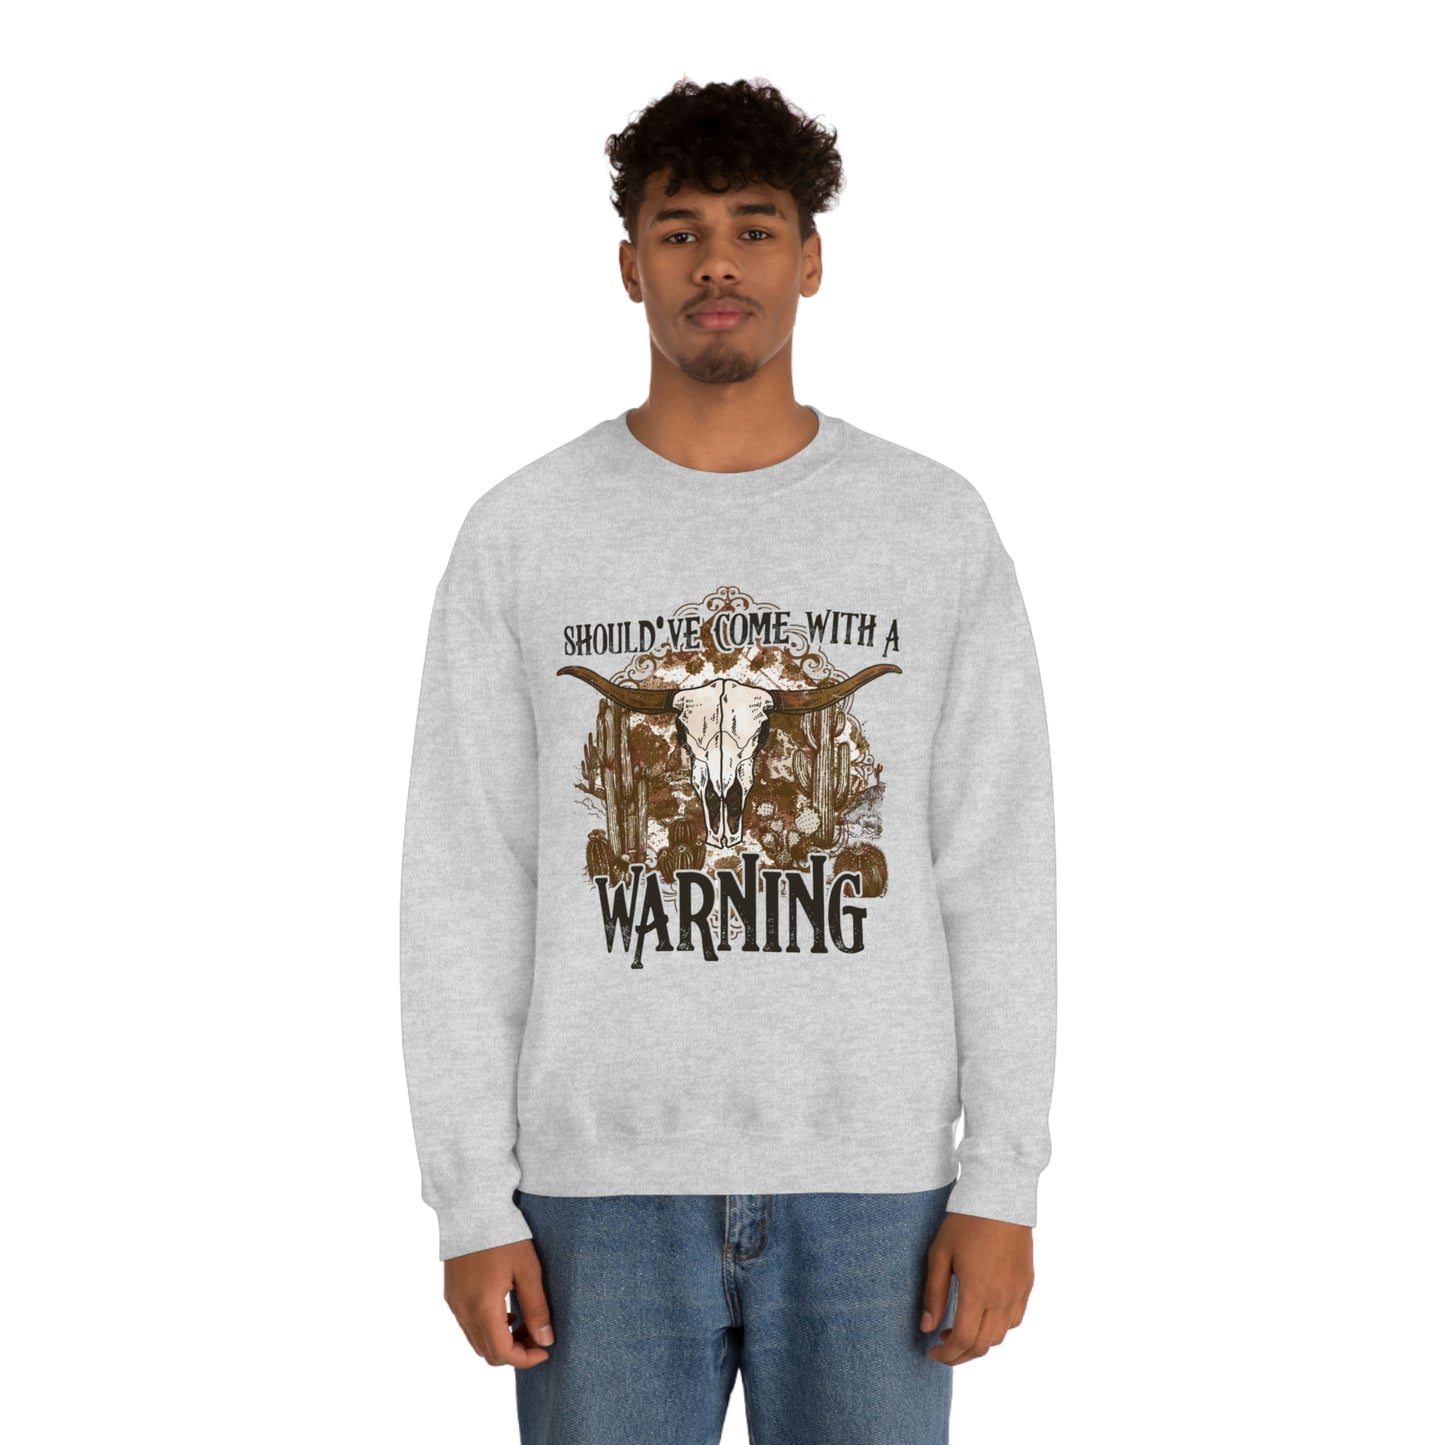 "Should've Come With A Warning" Unisex Crewneck Sweatshirt